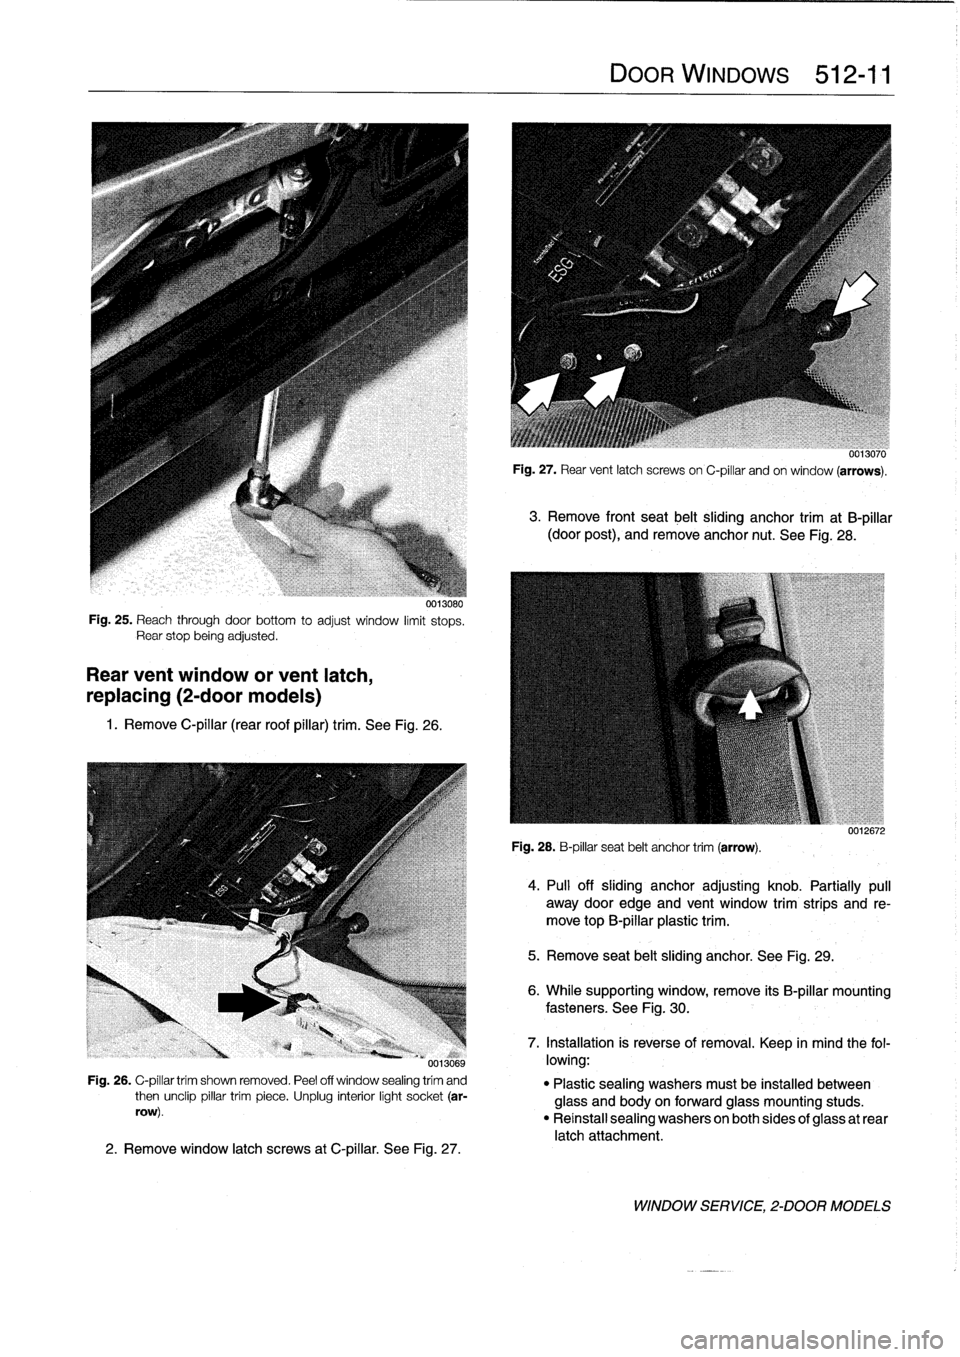 BMW 318i 1997 E36 Workshop Manual 
0013080
Fig
.
25
.
Reach
through
doorbottom
to
adjust
window
limit
stops
.
Rear
stop
beingadjusted
.

Rear
vent
window
or
vent
latch,

replacing
(2-door
modeis)

1
.
Remove
C-pillar
(rear
roof
pillar